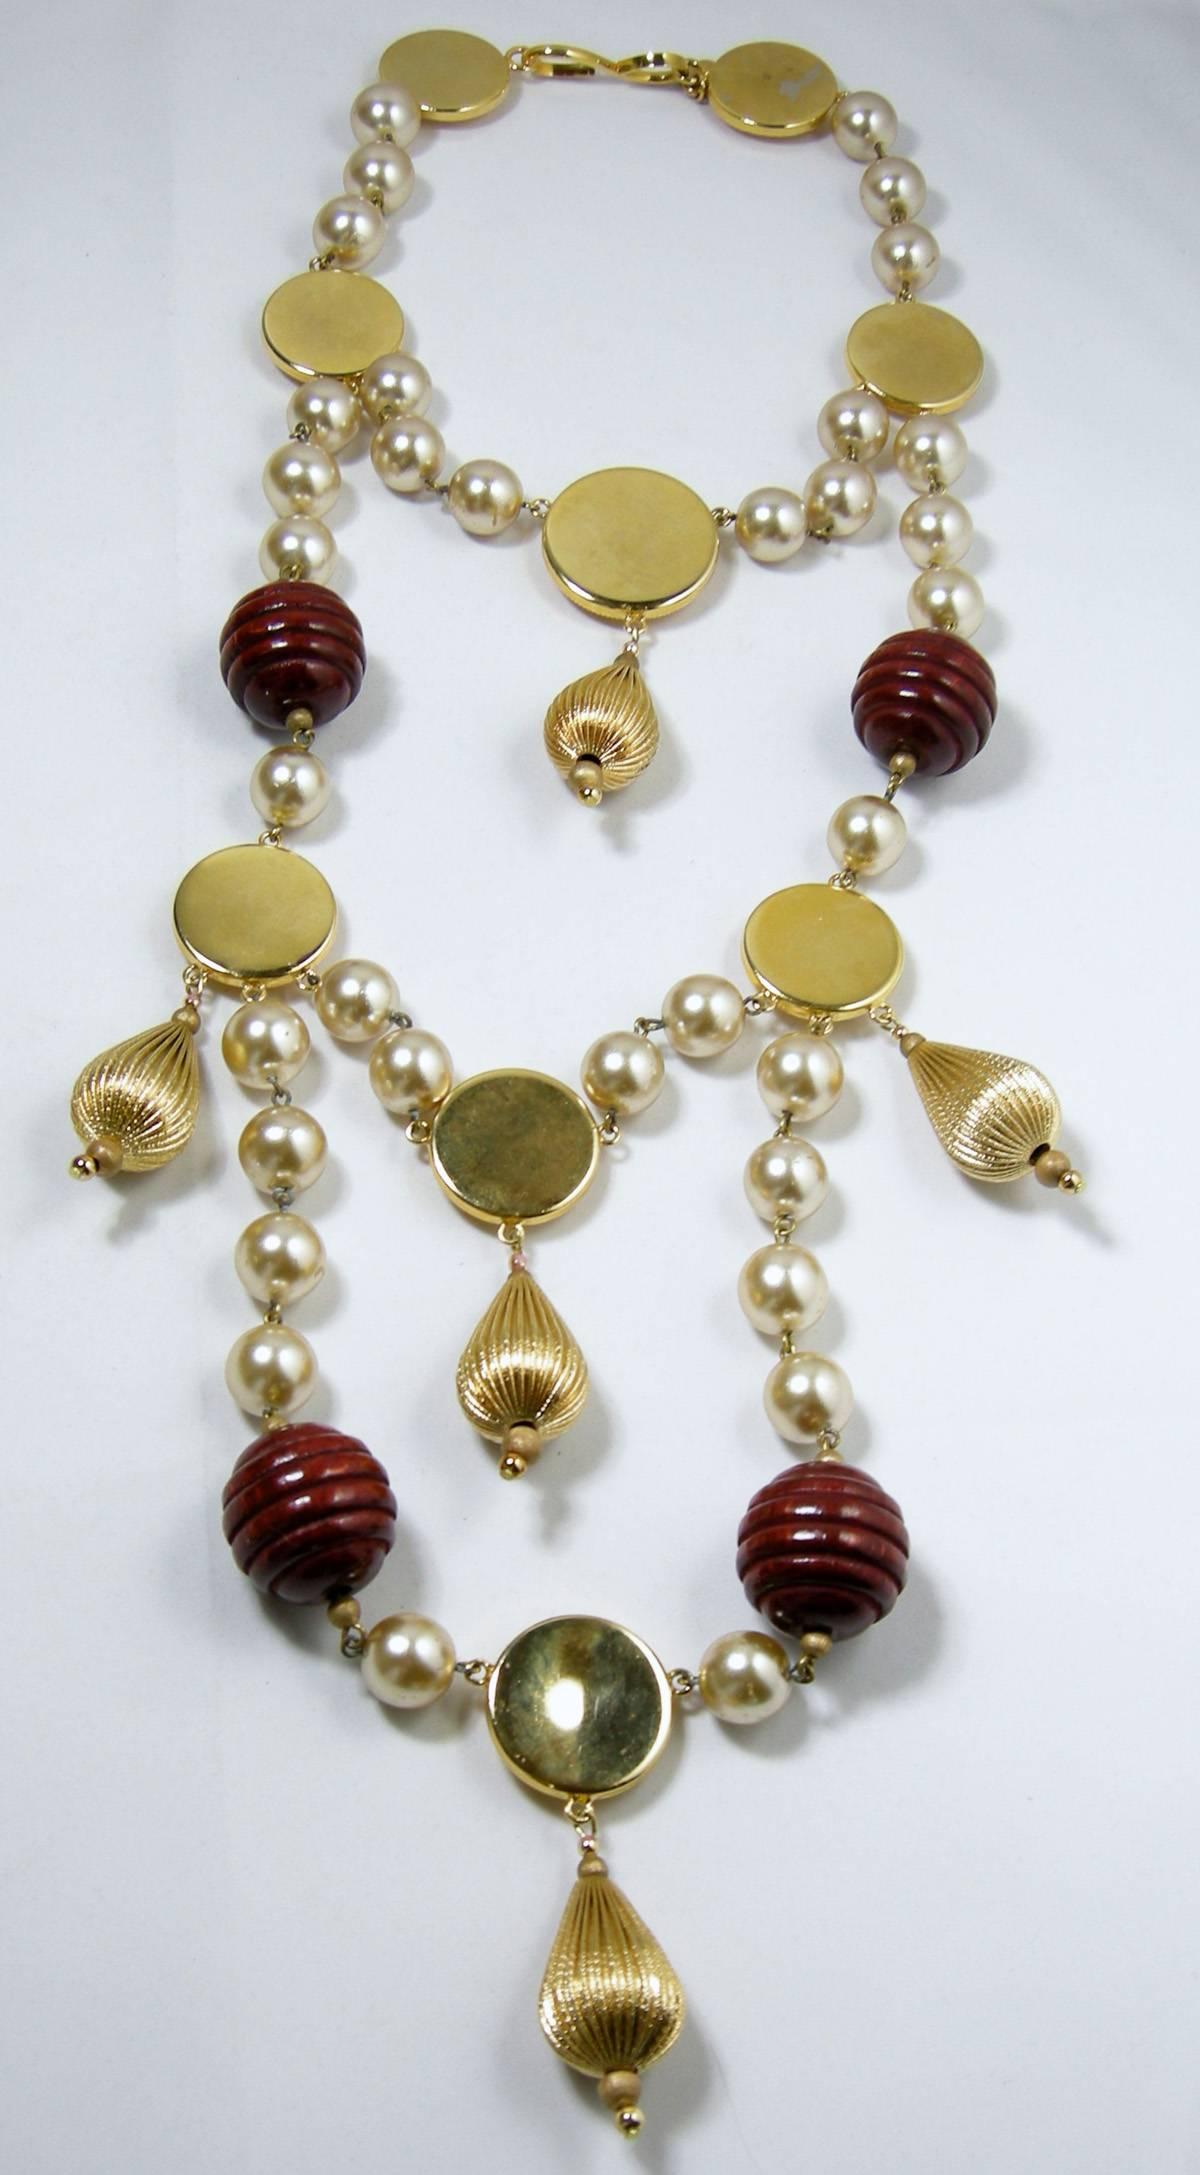 This vintage Roger Scemama necklace done for Yves St. Laurent (YSL) features a multi-strand design with large, ridged dark wood and gold-tone balls with faux pearl accents in a gold-tone setting.  In excellent condition, this necklace measures 16